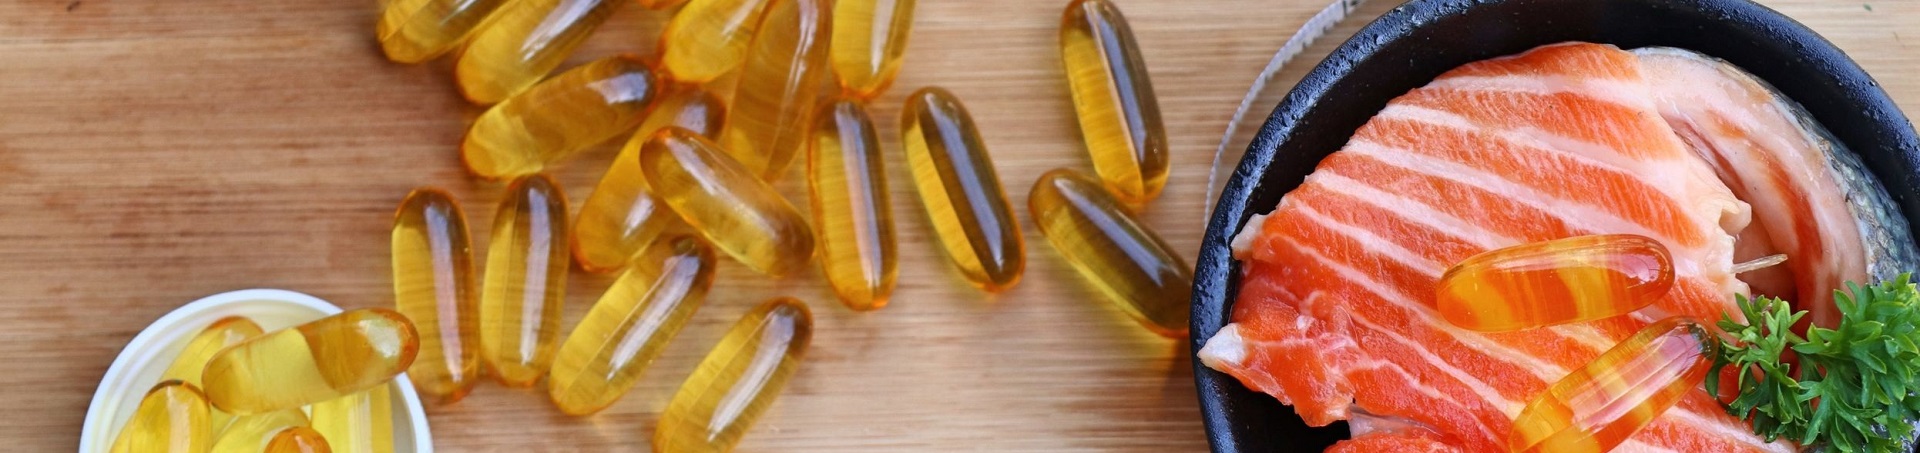 omega 3s for dogs and cats - fish oil supplements and salmon